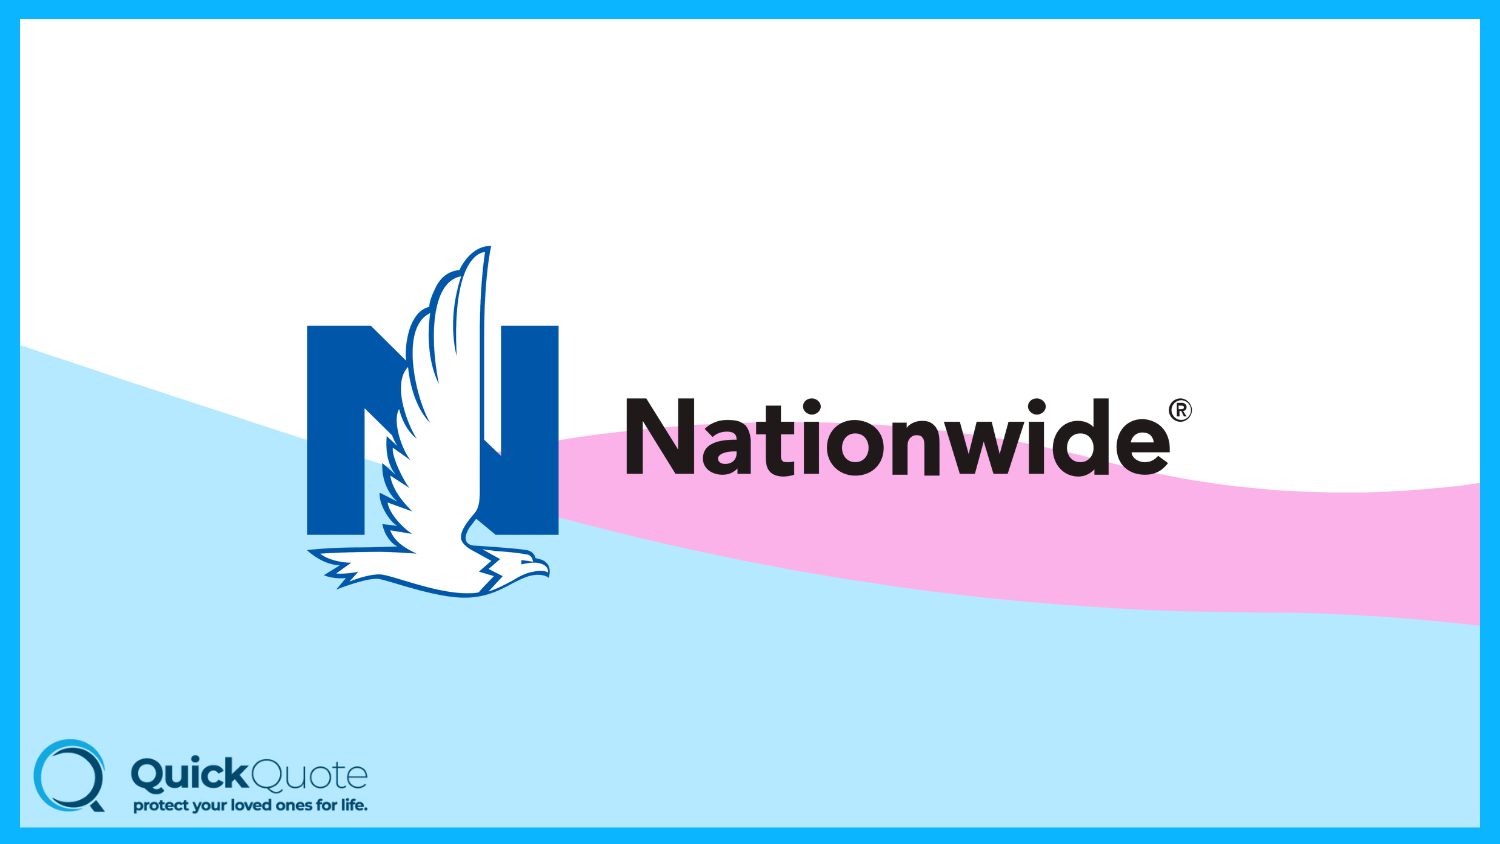 Nationwide: Best Life Insurance for High-Risk Individuals